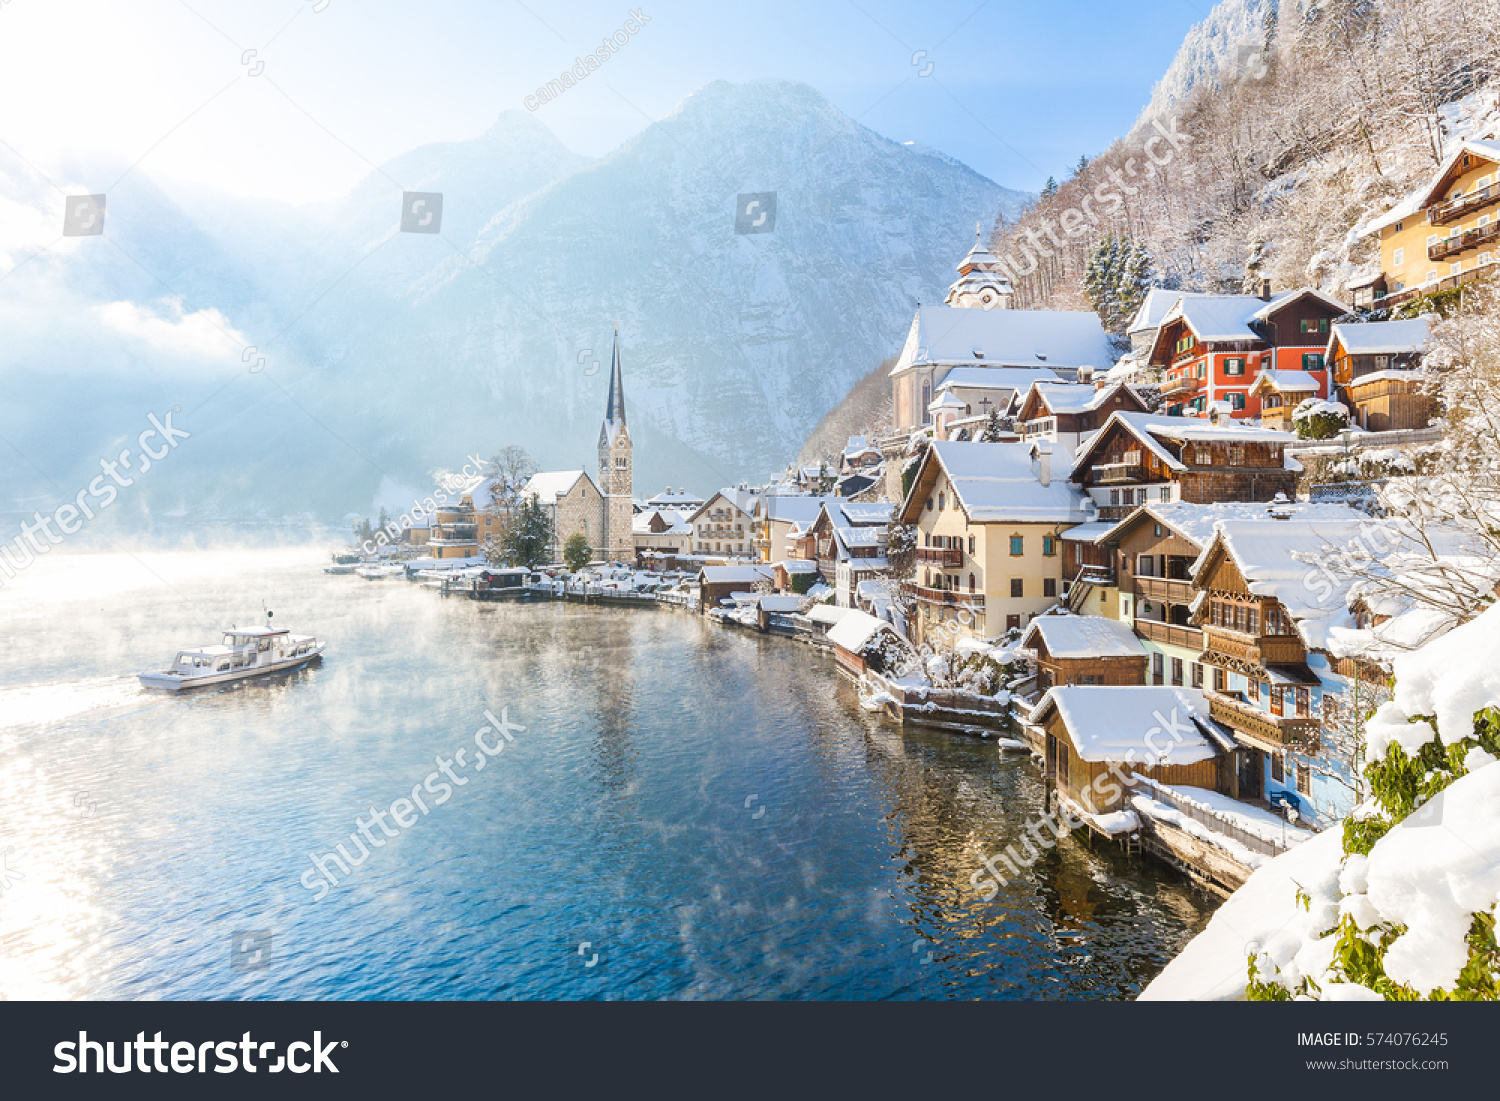 Classic postcard view of famous Hallstatt lakeside town in the Alps with traditional passenger ship on a beautiful cold sunny day with blue sky and clouds in winter, Salzkammergut region, Austria #574076245